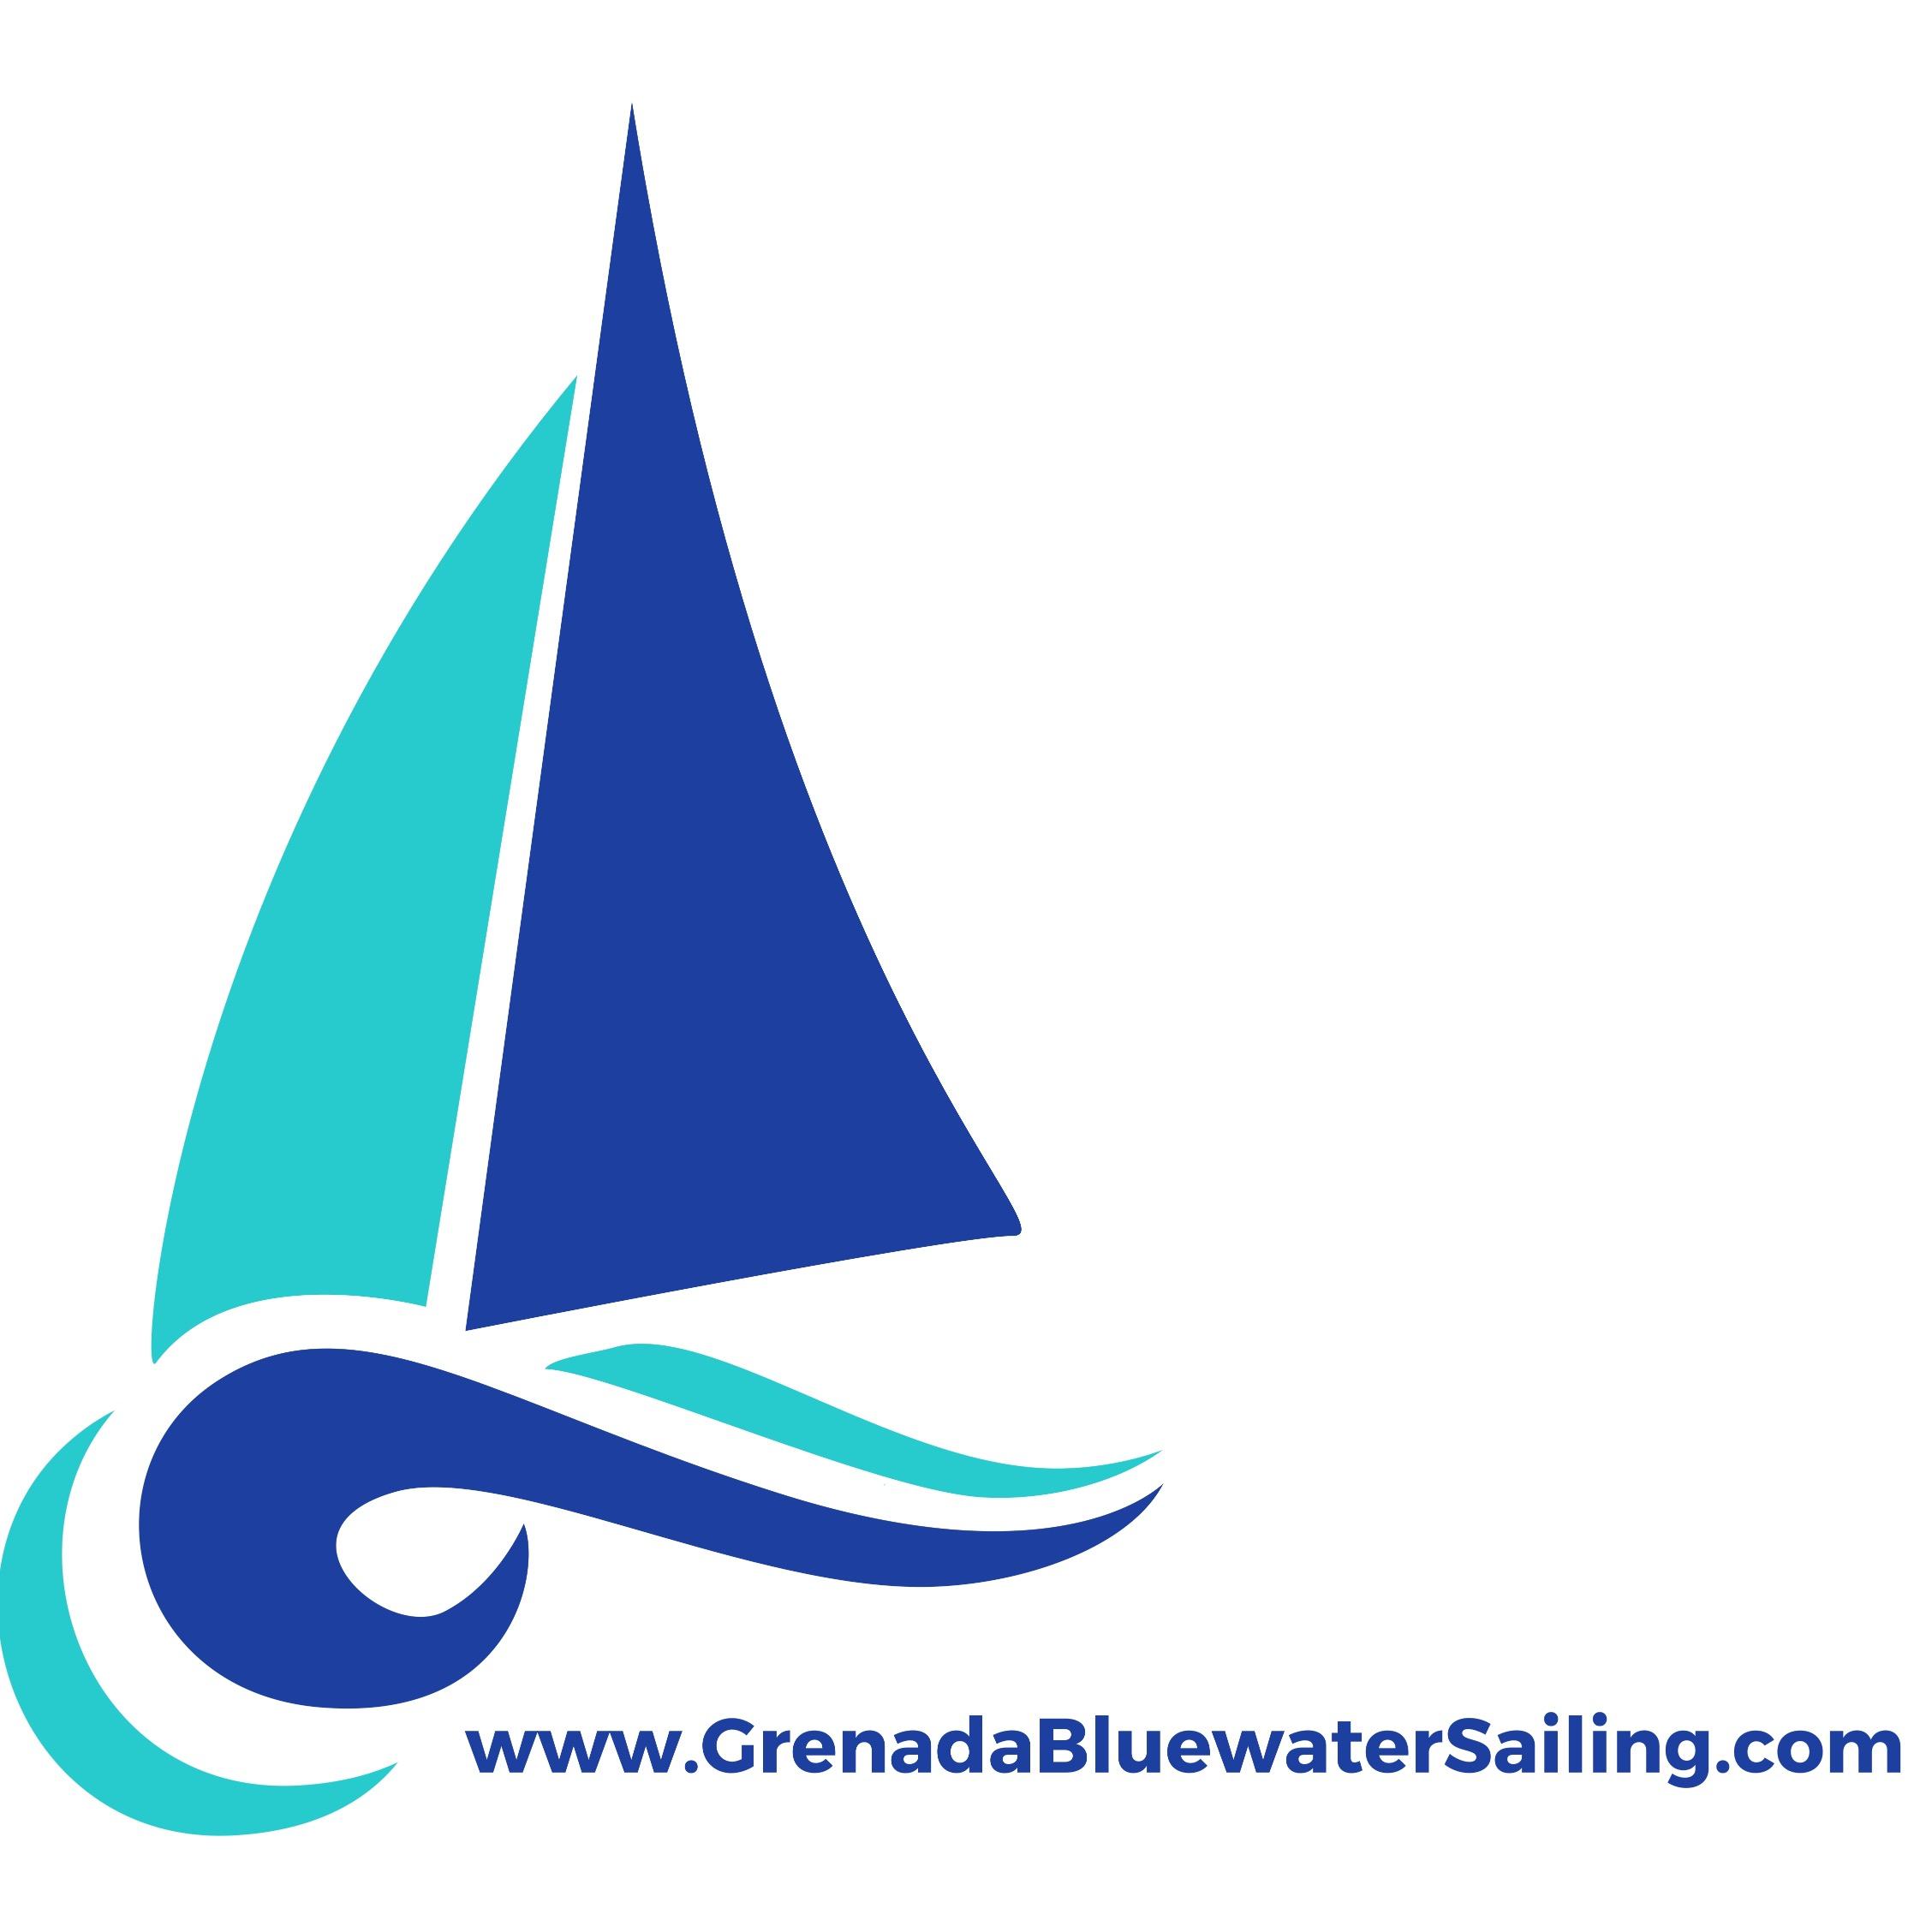 RYA Training Centre based in Grenada, W.I. The BEST Sailing Destination in the Caribbean! Vacation charters and sail training for all ages and abilities.